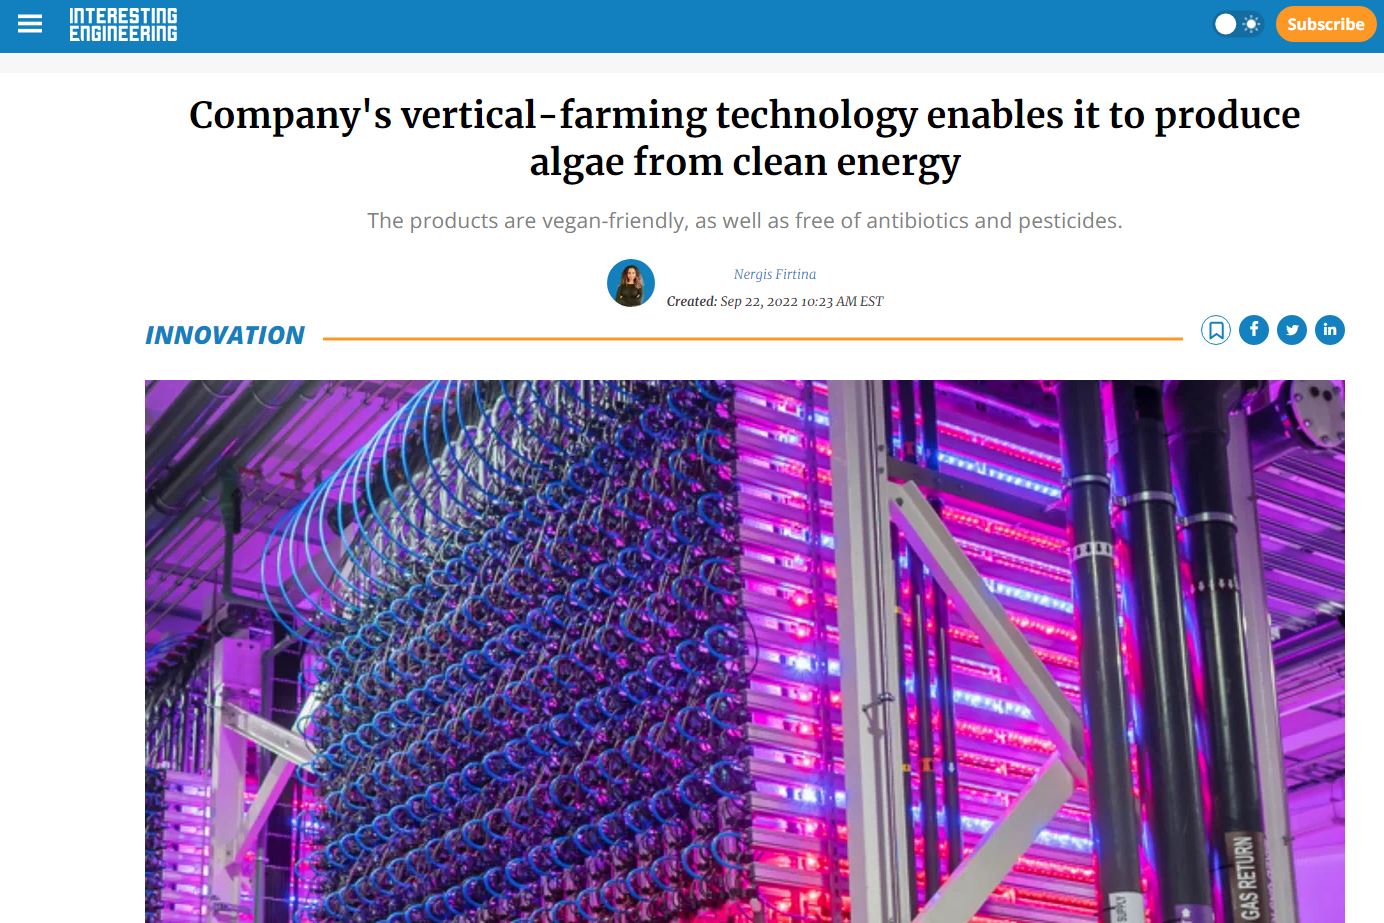 Company's vertical-farming technology enables it to produce algae from clean energy